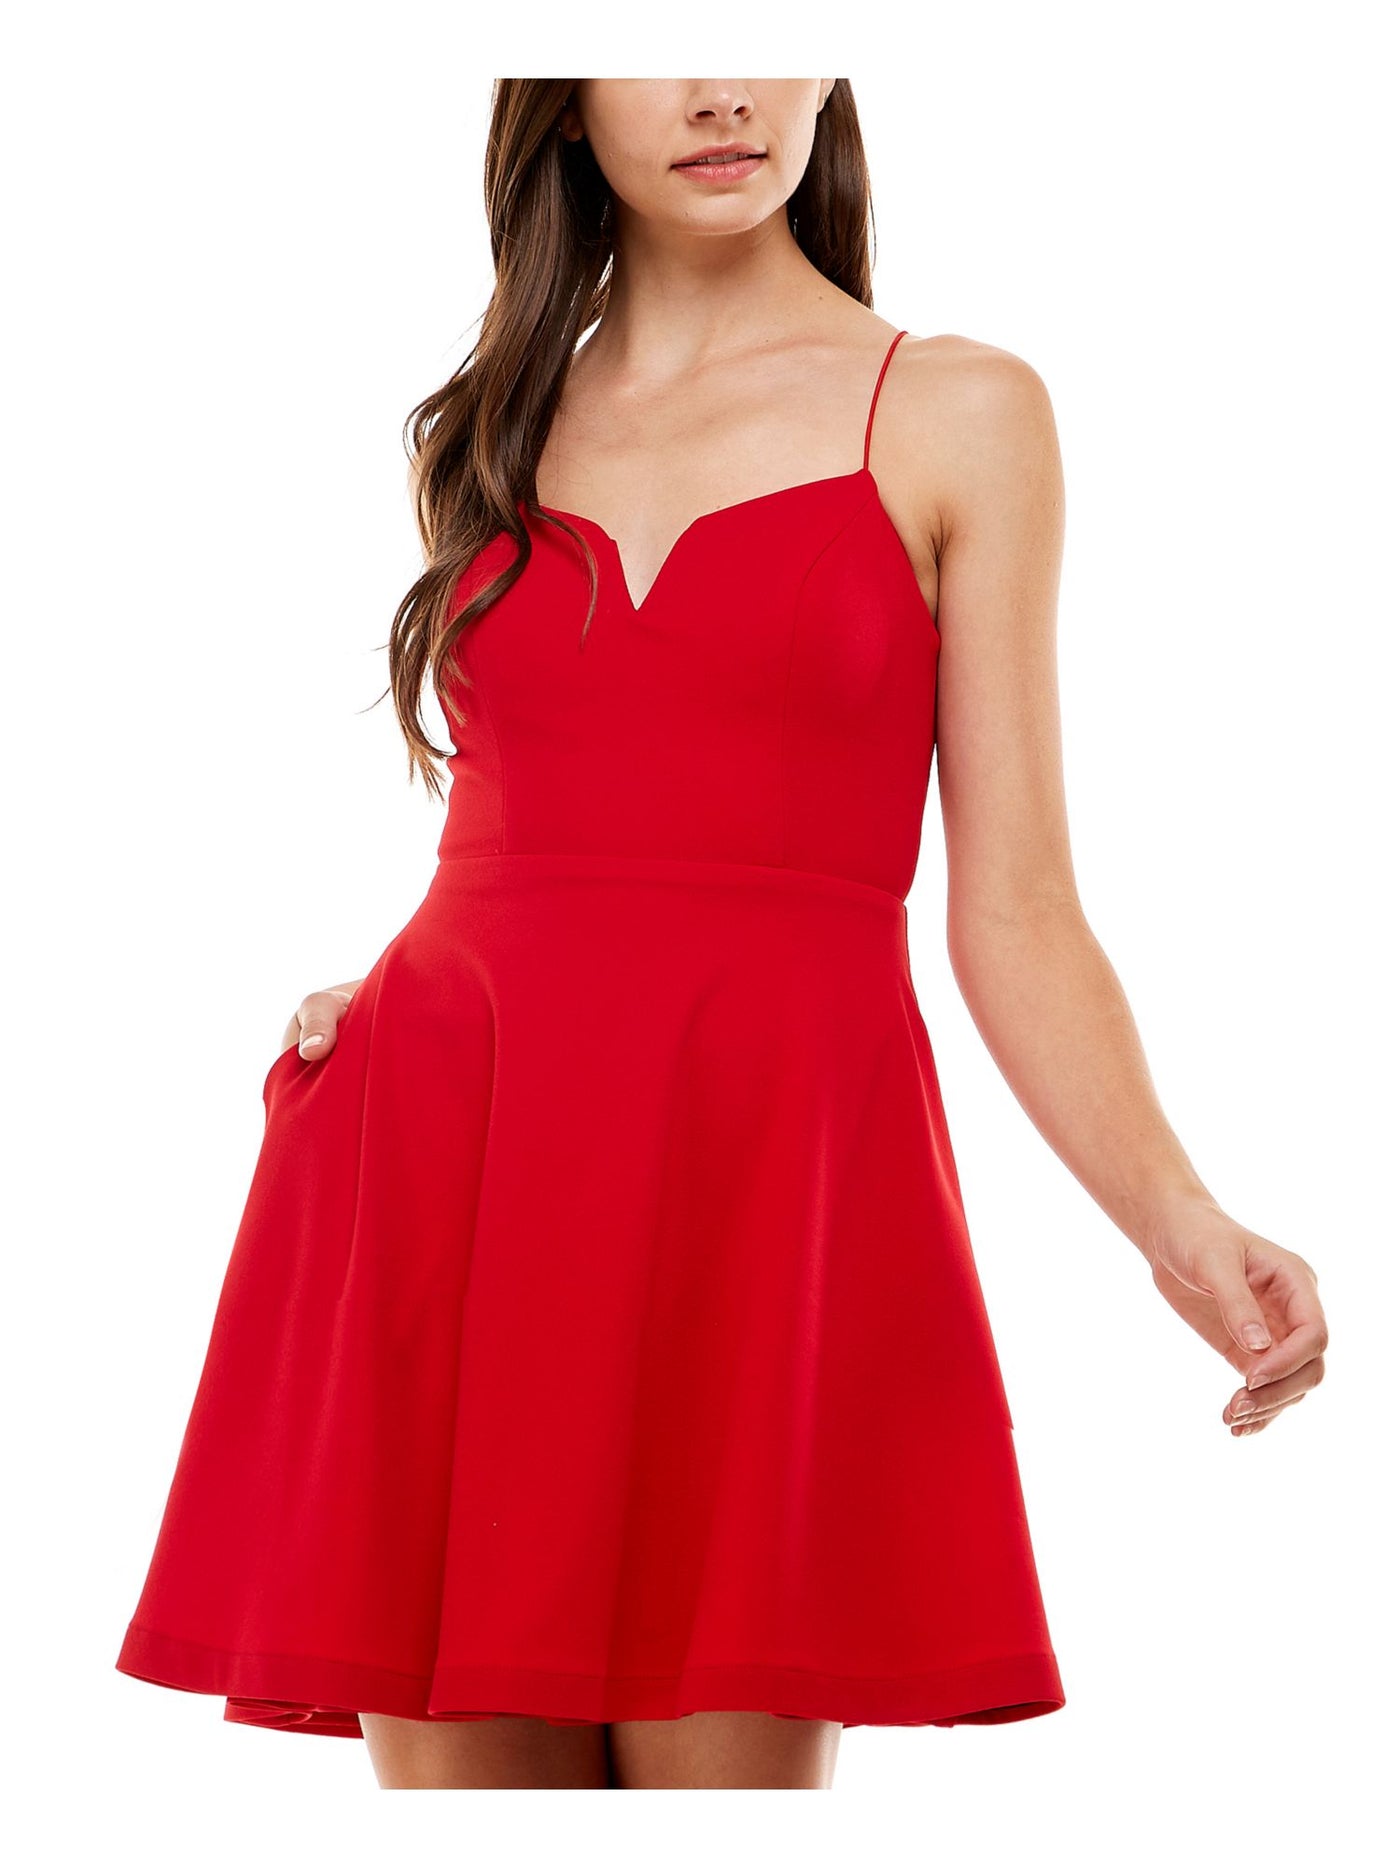 CITY STUDIO Womens Red Stretch Pocketed Zippered Criss-cross Back Lined Spaghetti Strap V Neck Short Party Fit + Flare Dress Juniors 9